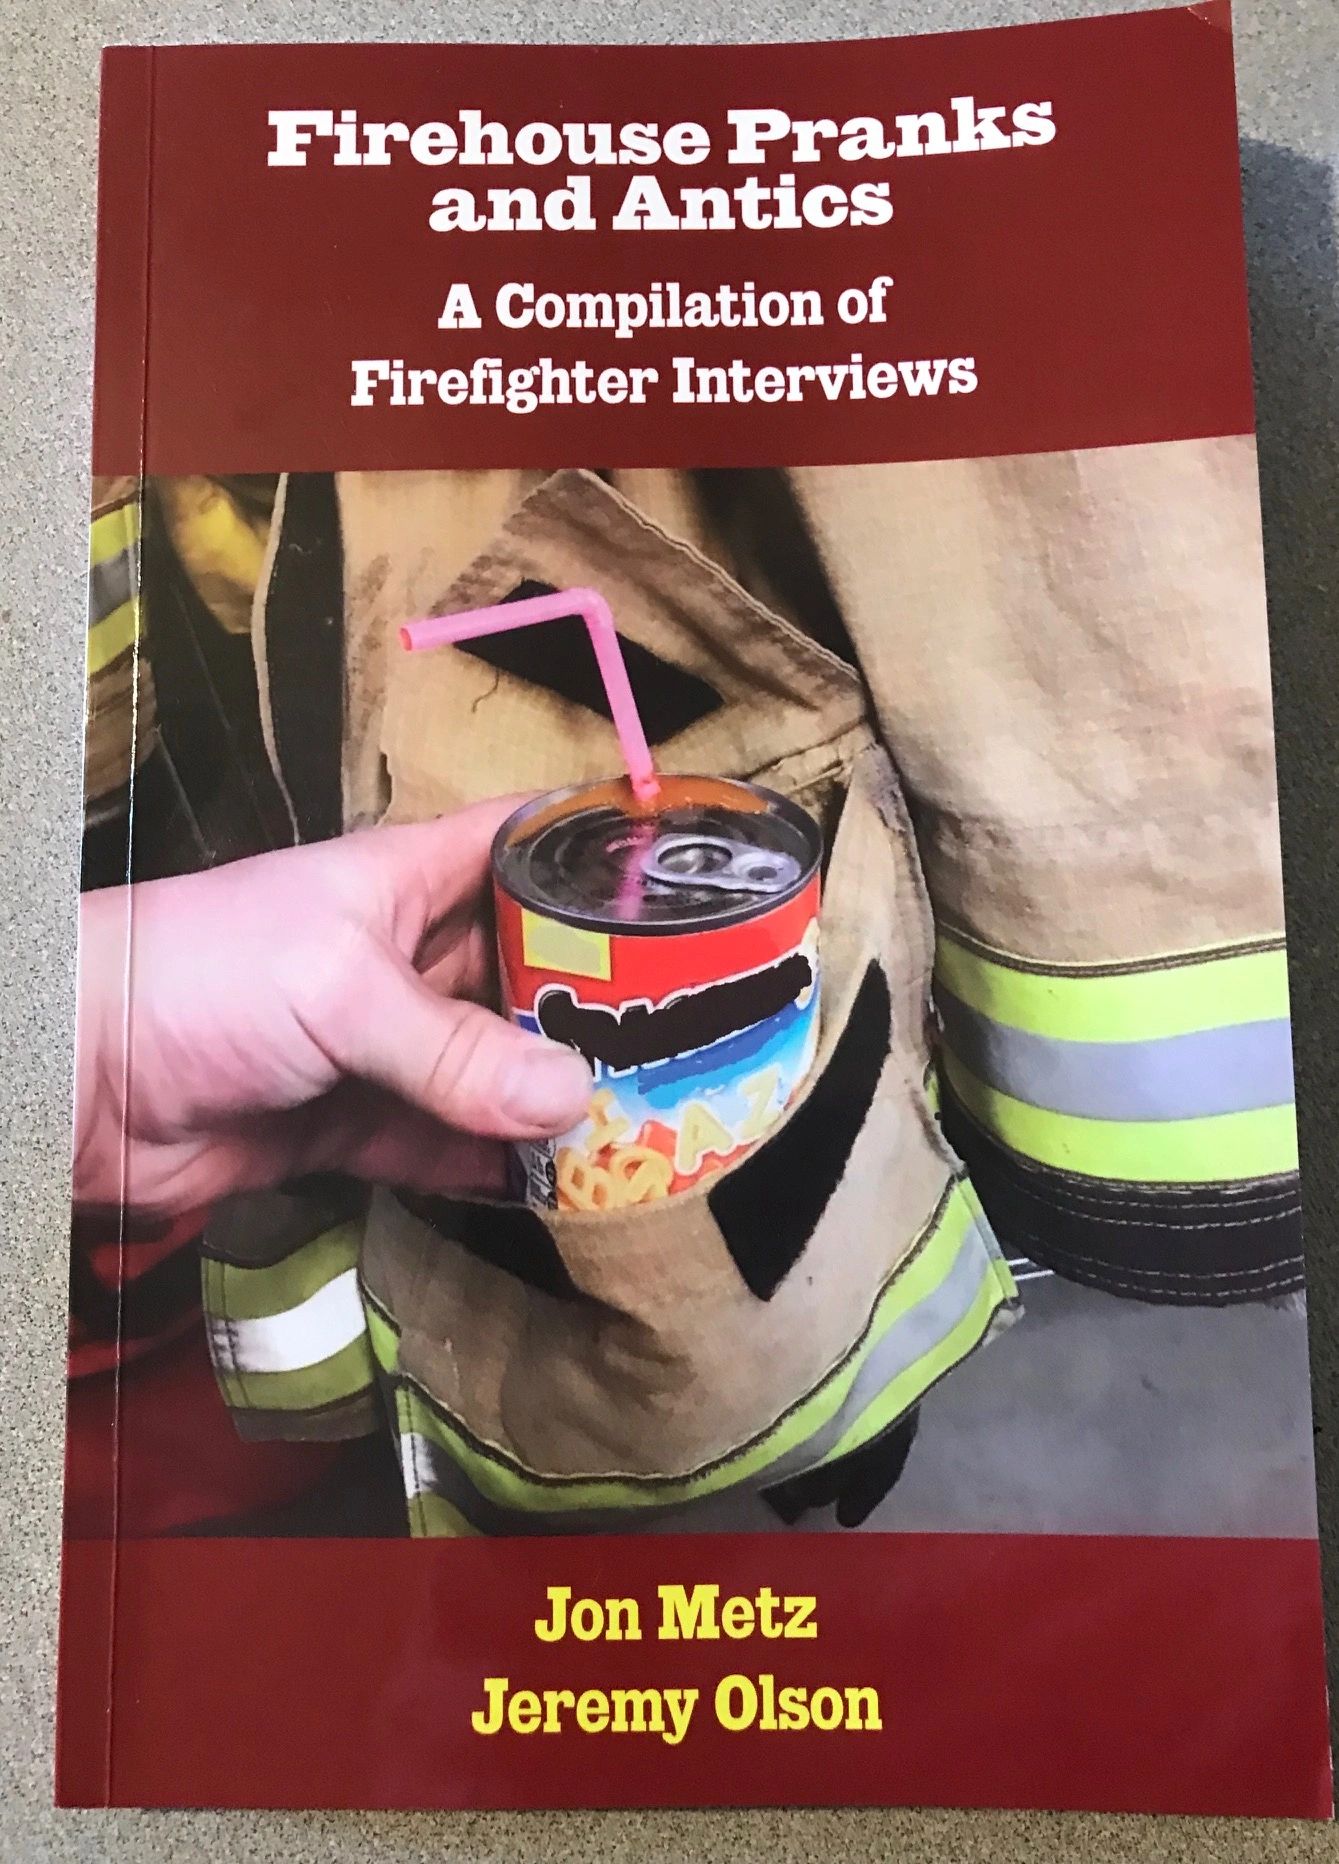 Fire House Pranks and Antics is available in print, ebook, and Audio book Formats. 
